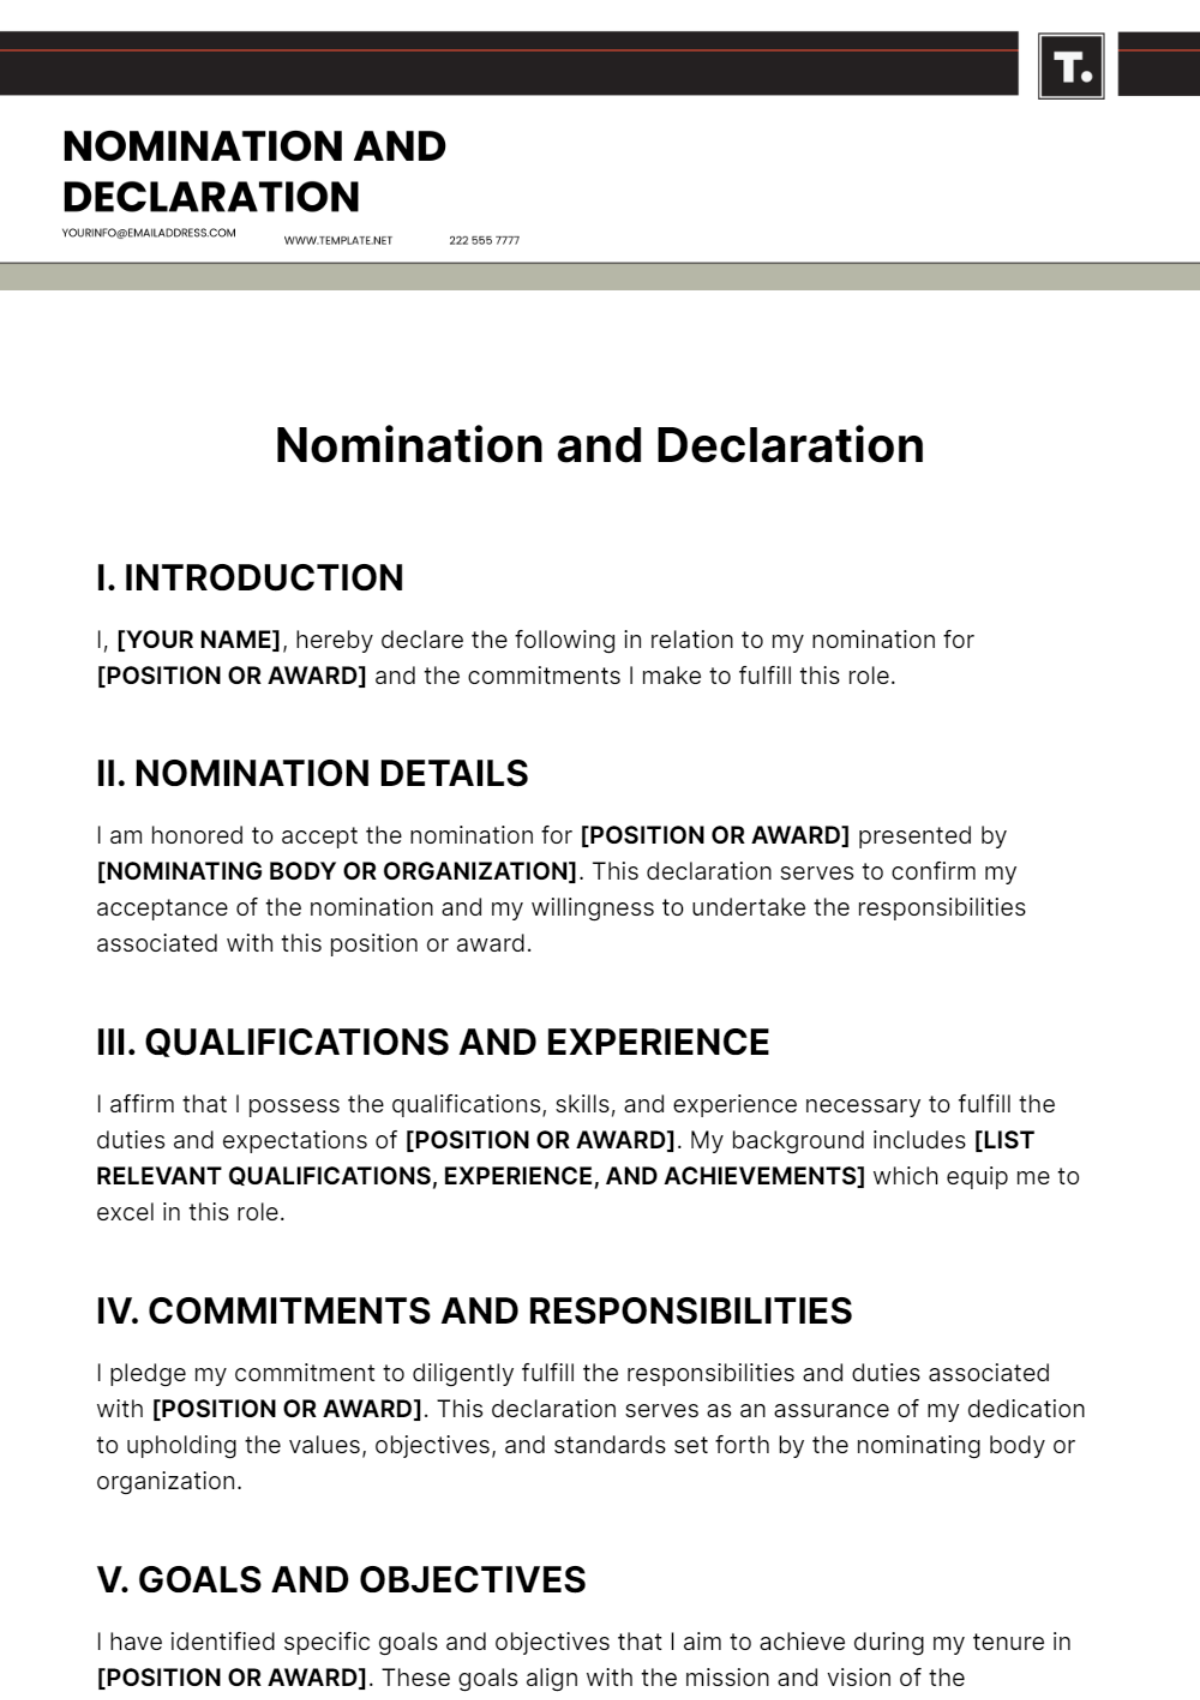 Nomination and Declaration Template